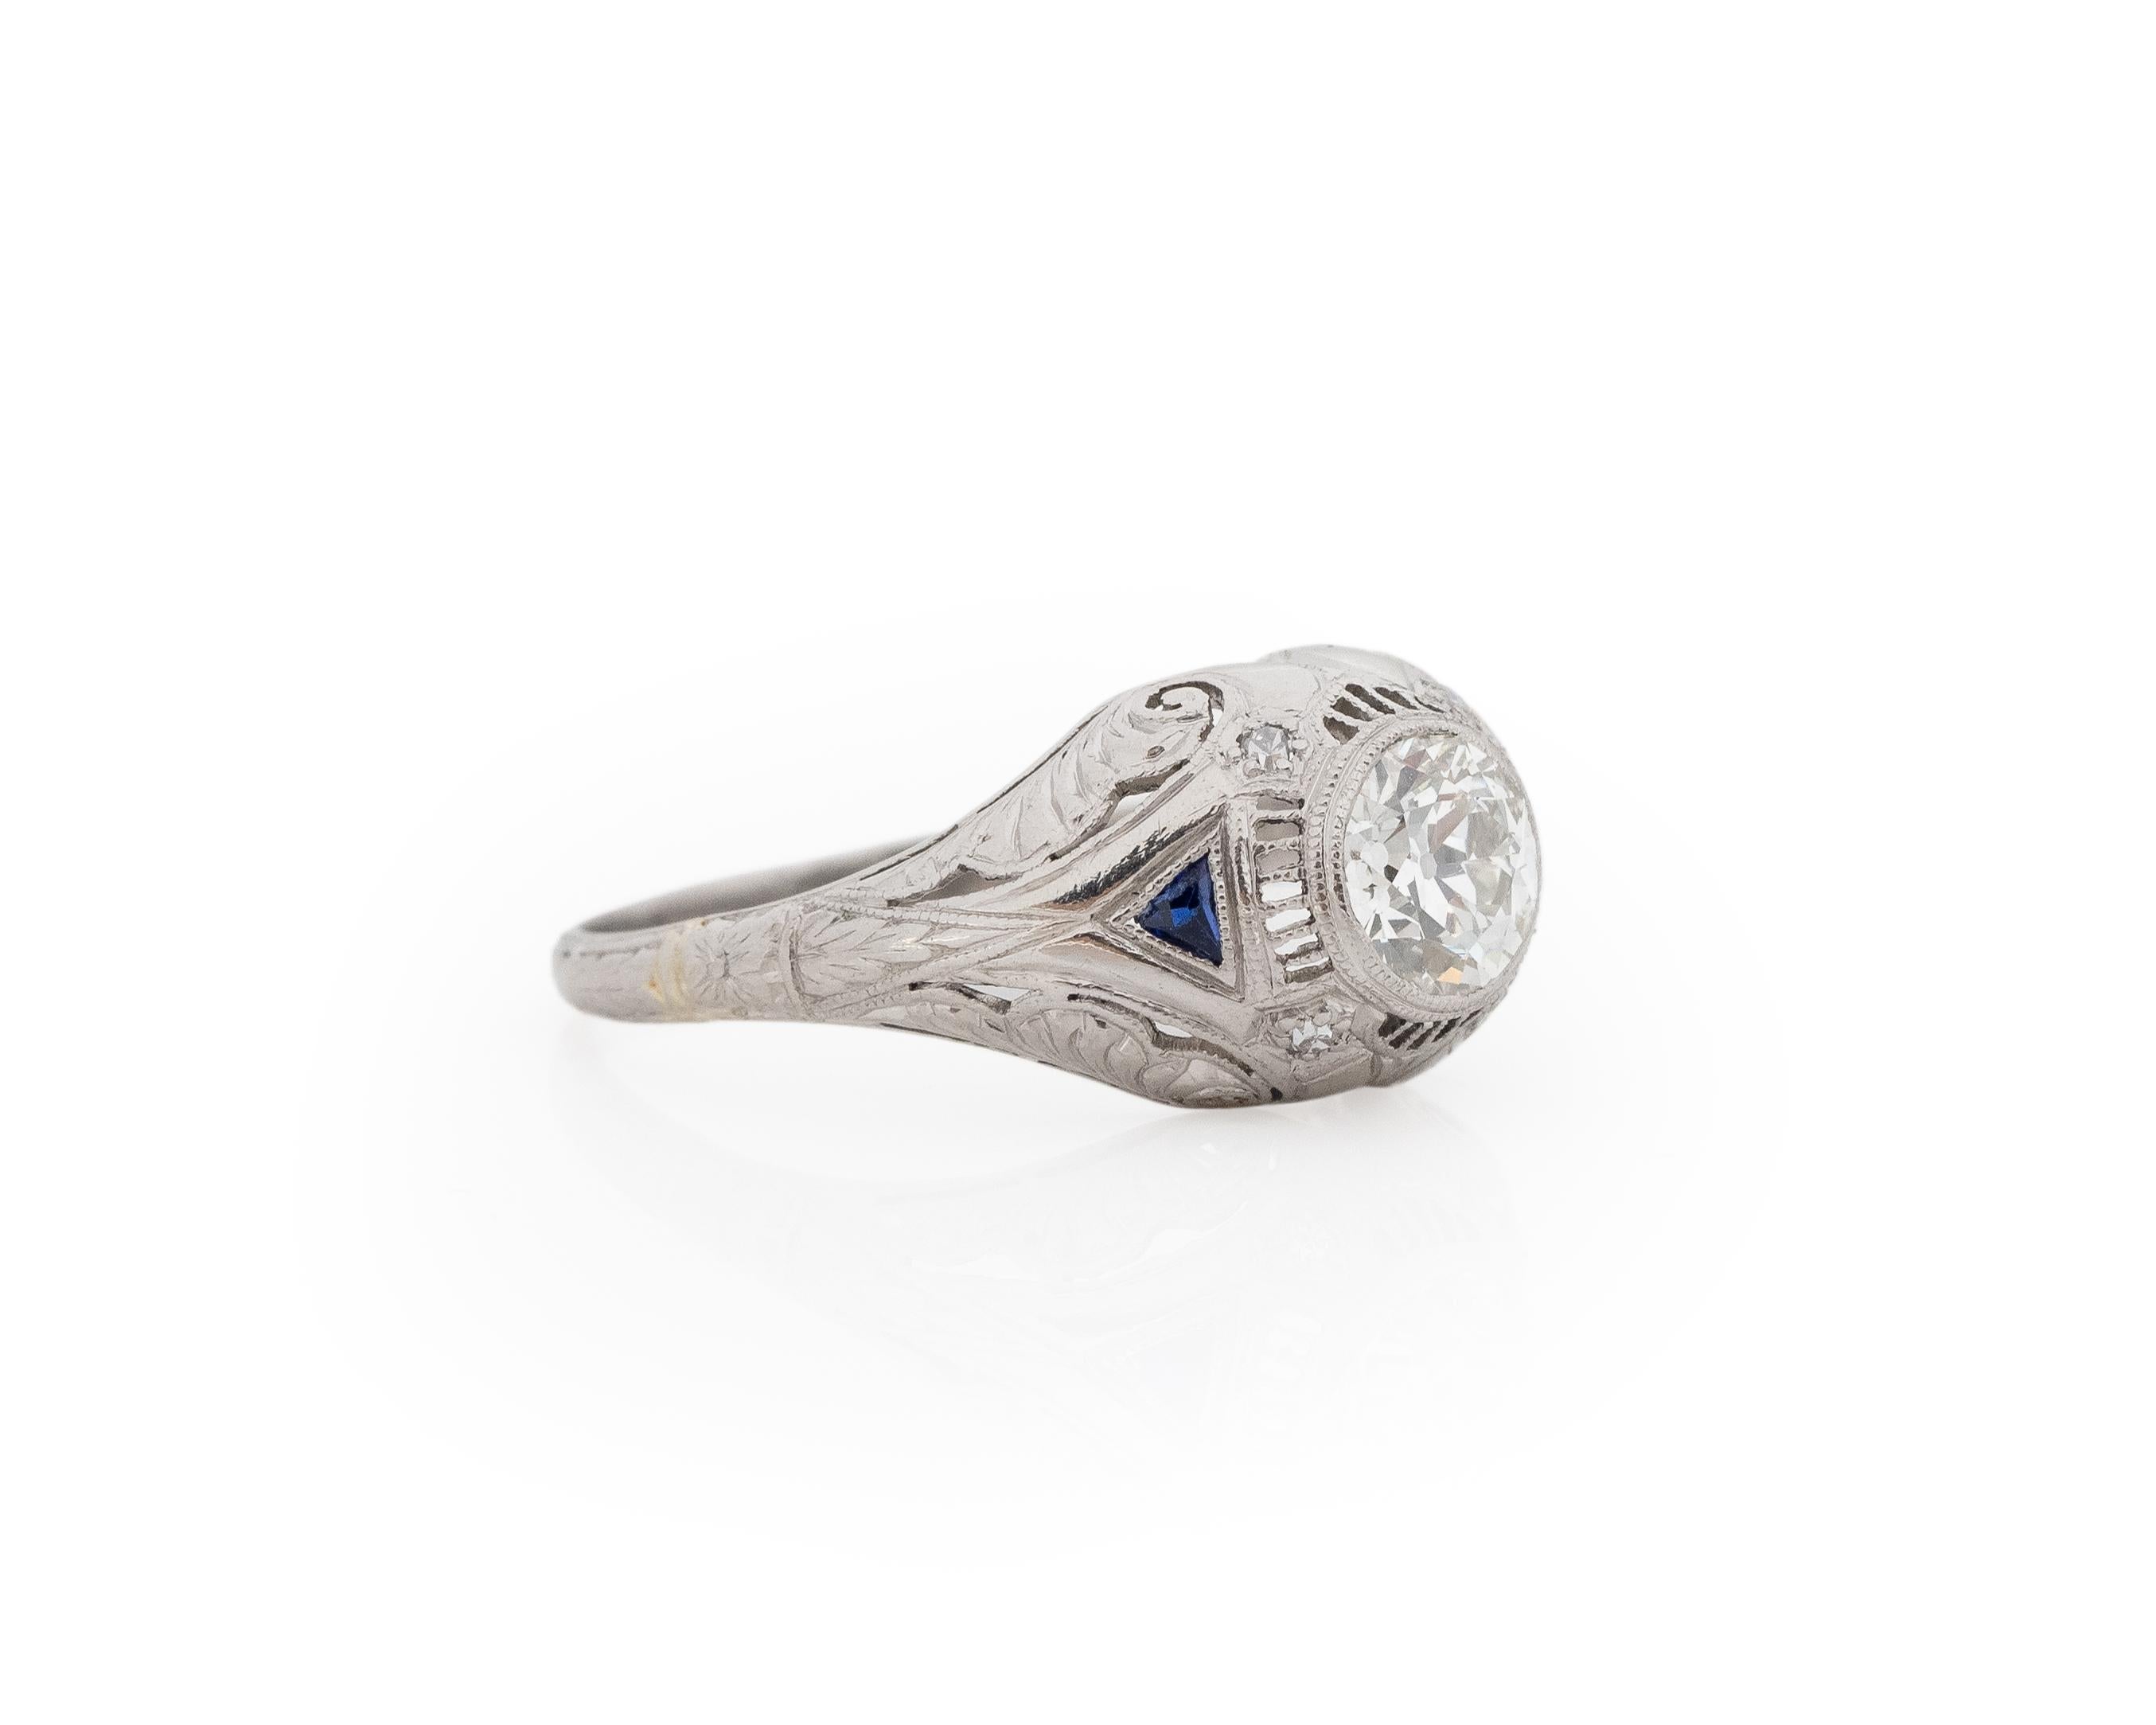 Year: 1920s

Item Details:
Ring Size: 7.75
Metal Type: Platinum [Hallmarked, and Tested]
Weight: 3.8 grams

Center Diamond Details:
Weight: .77ct total weight
Cut: Old European brilliant
Color: J
Clarity: SI1
Type: Natural

Finger to Top of Stone